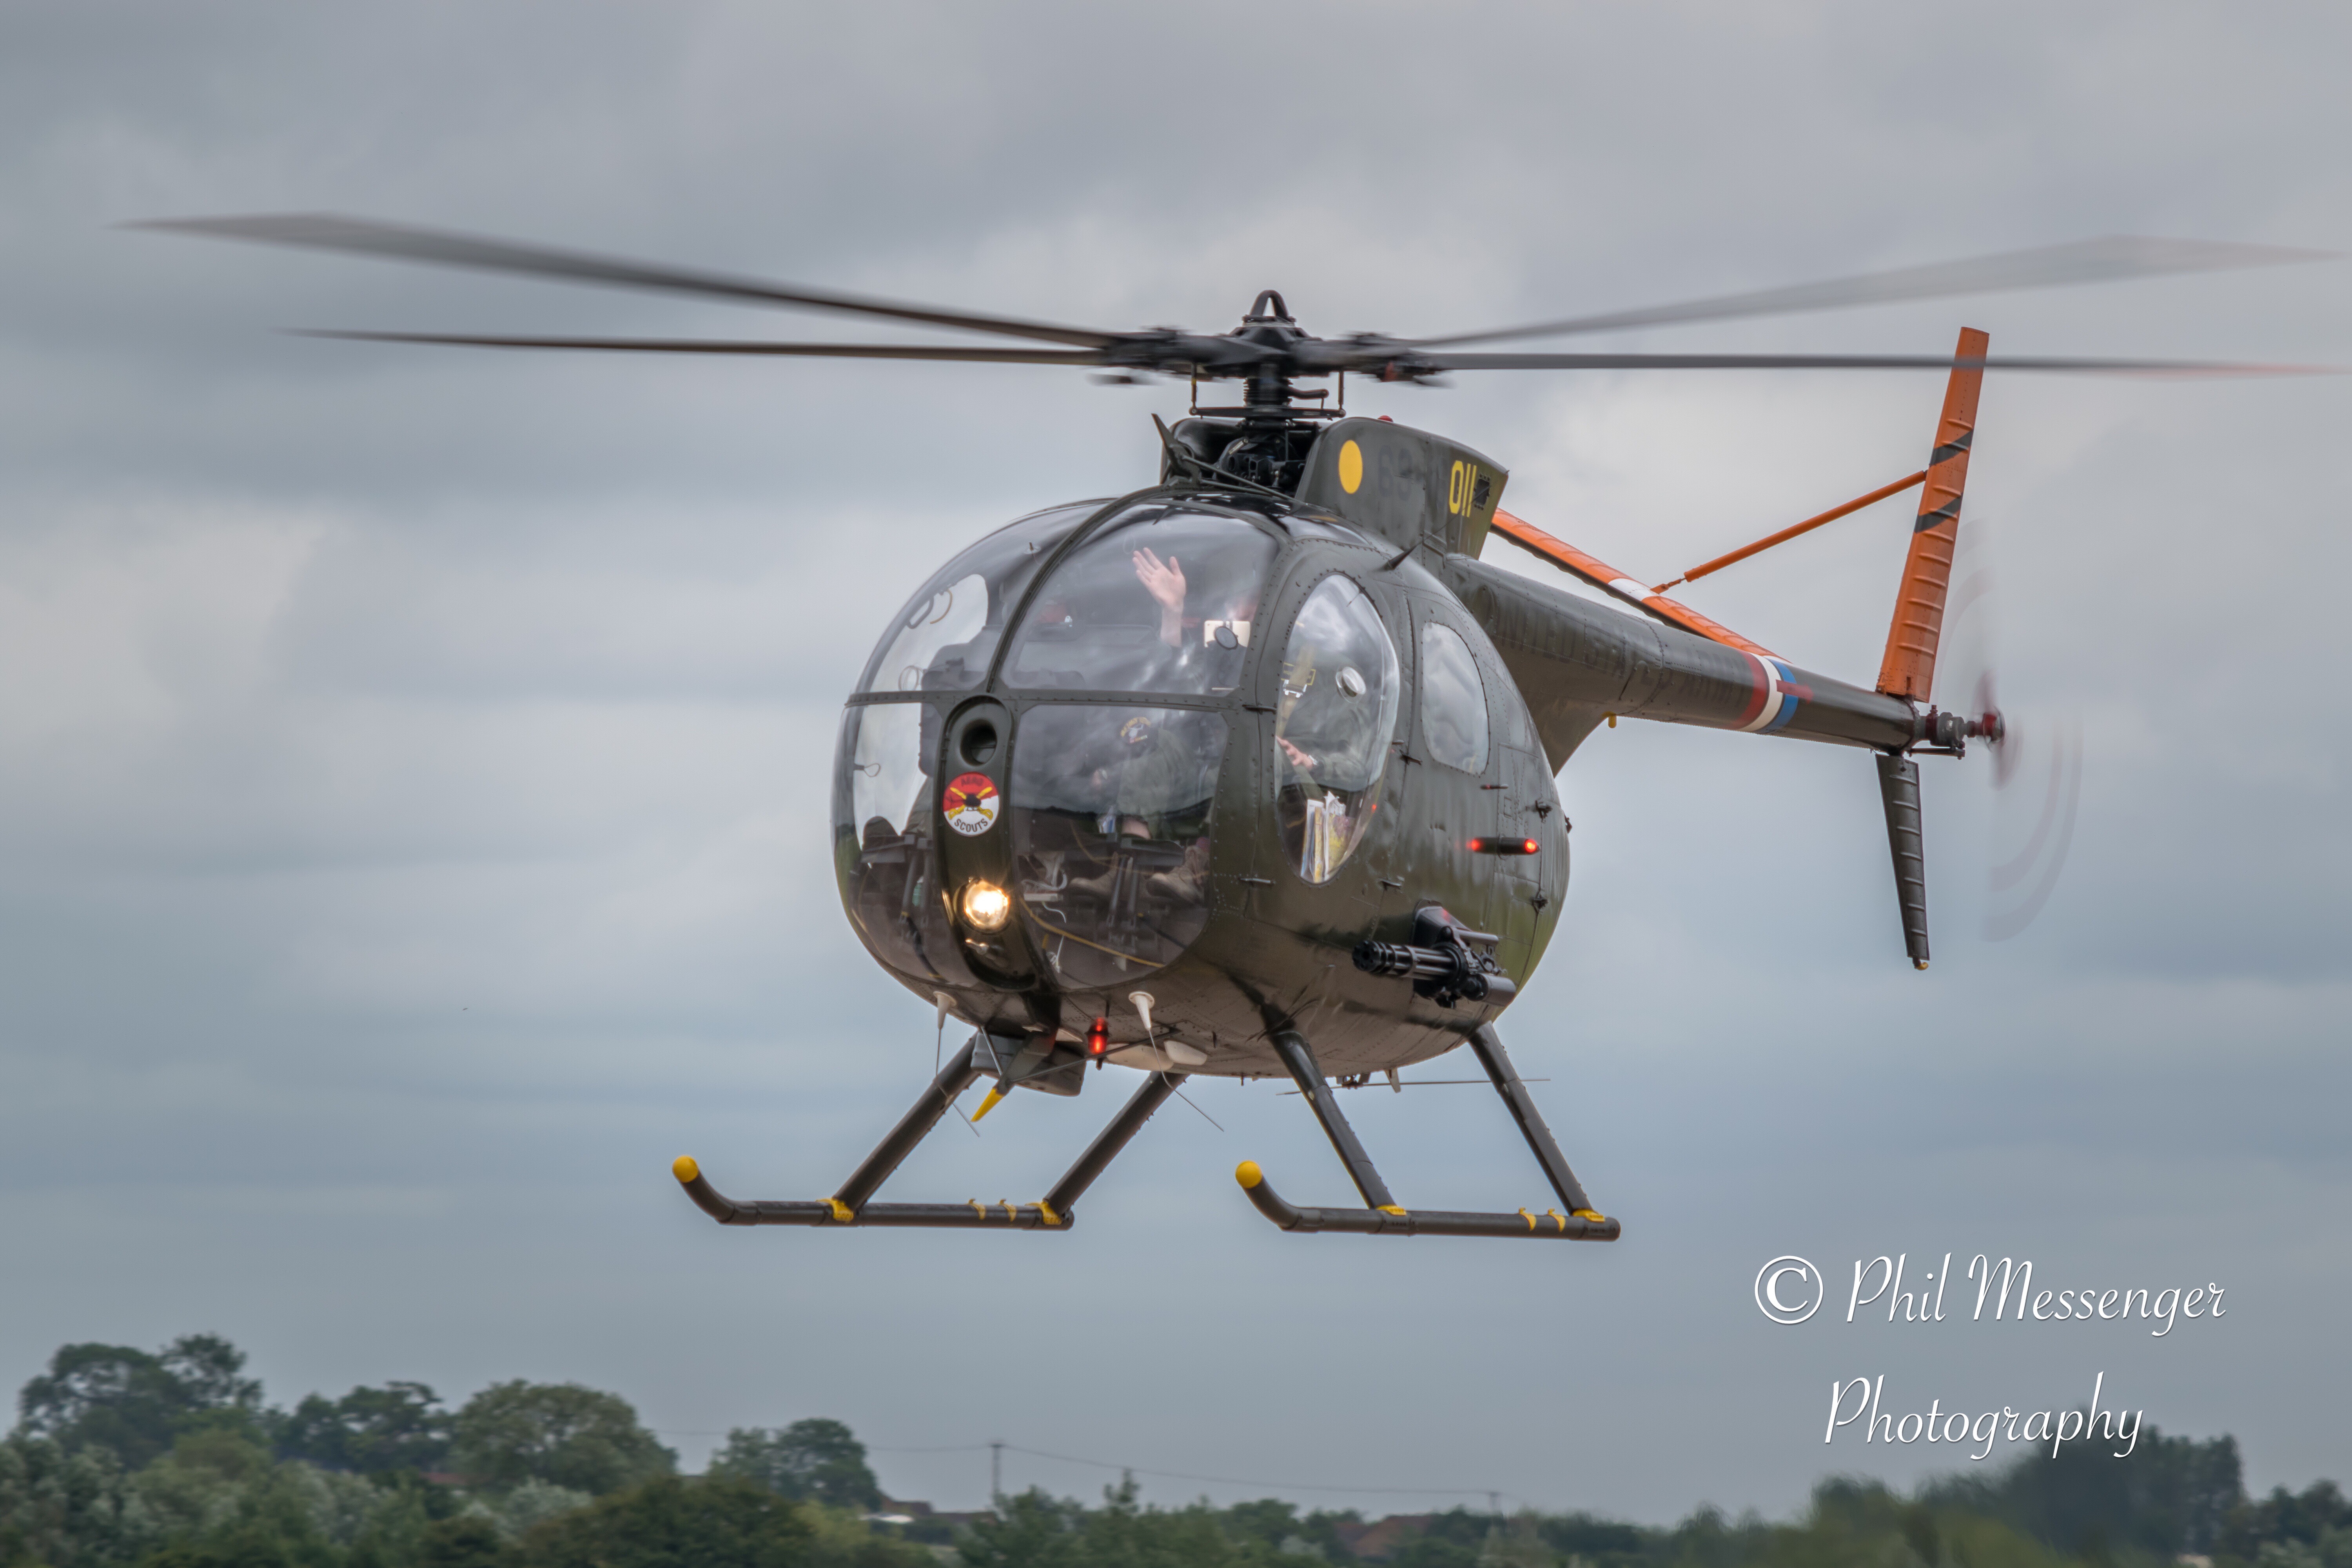 The Hughes OH-6 Cayuse departing the Royal International Air Tattoo.